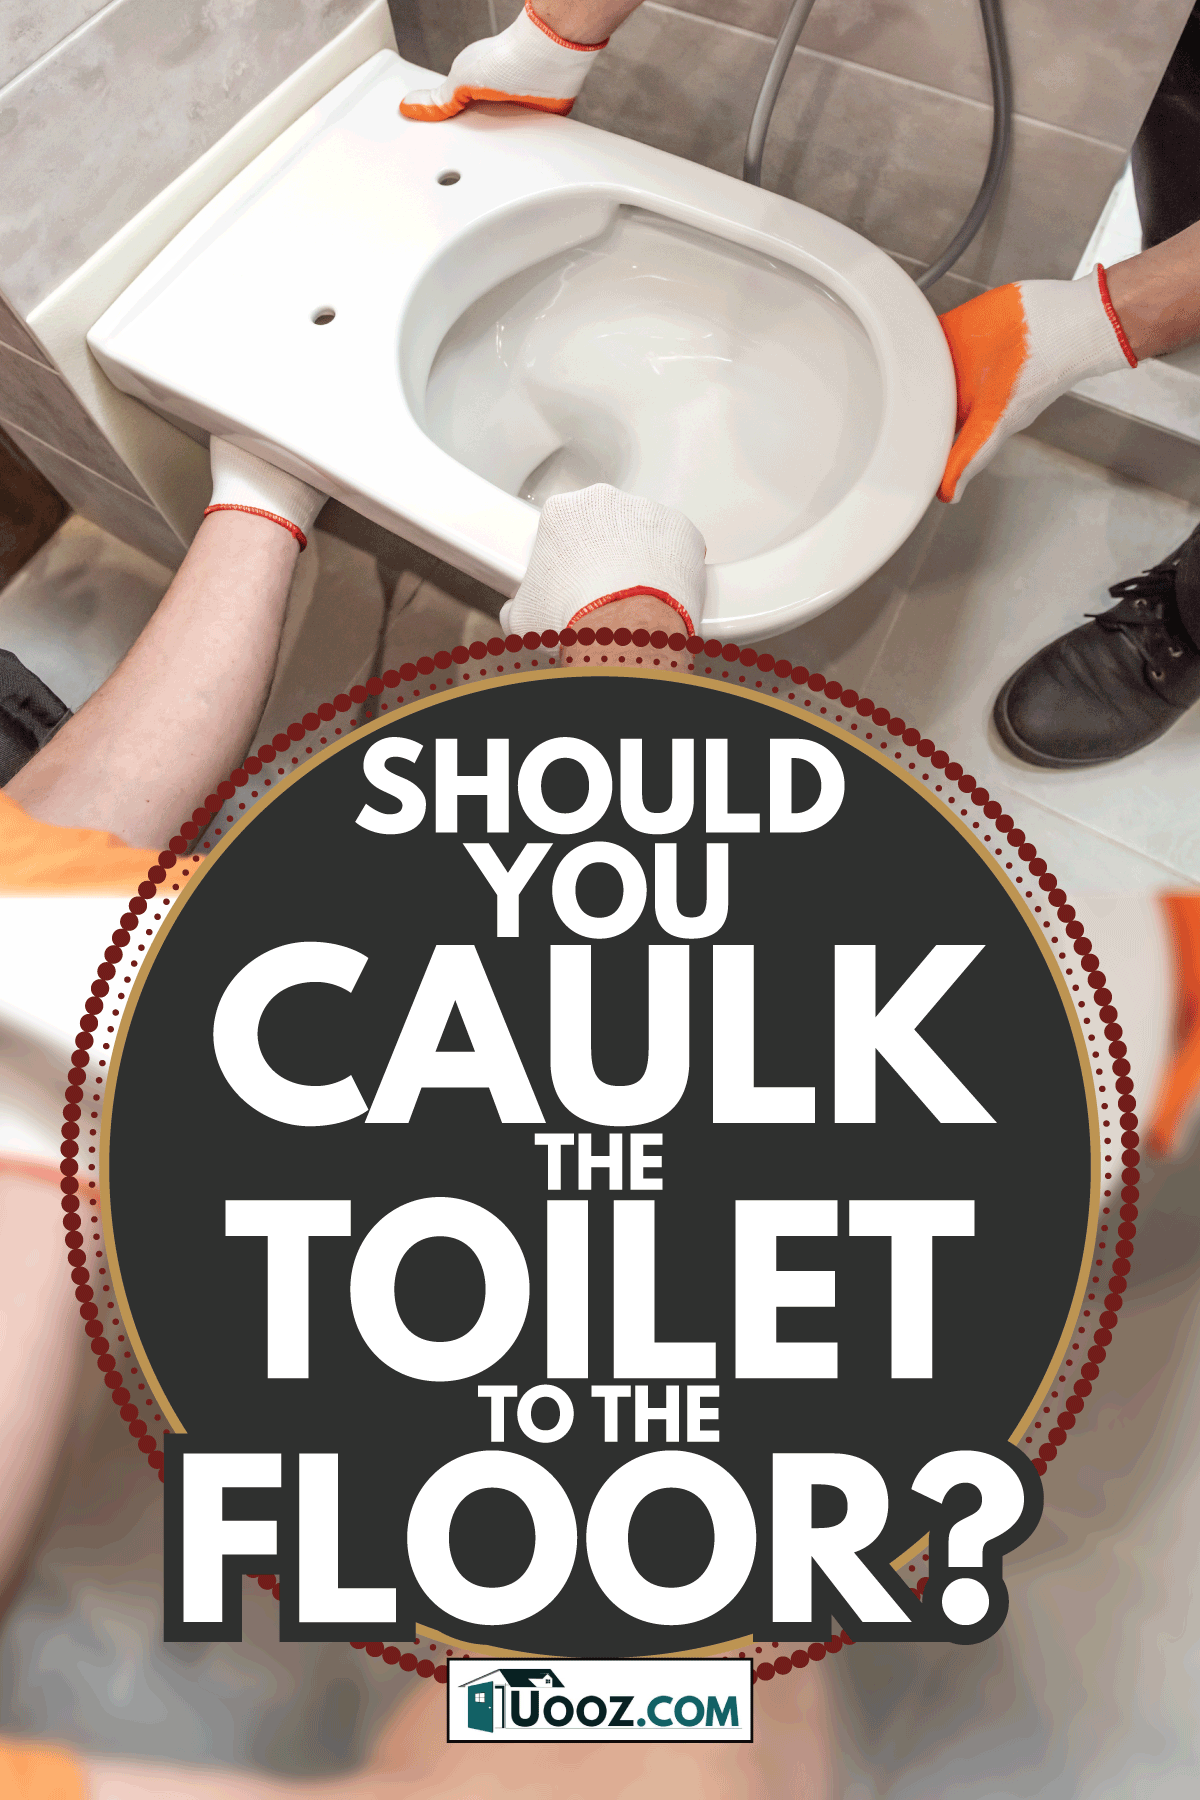 Workers are installing a wall-hung toilet on the wall. Should You Caulk The Toilet To The Floor